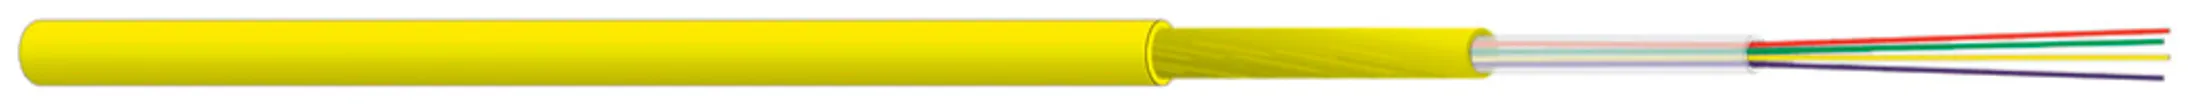 Cavo FO Indoor FTTH 1×4 G.657 A Coat Dca giallo 